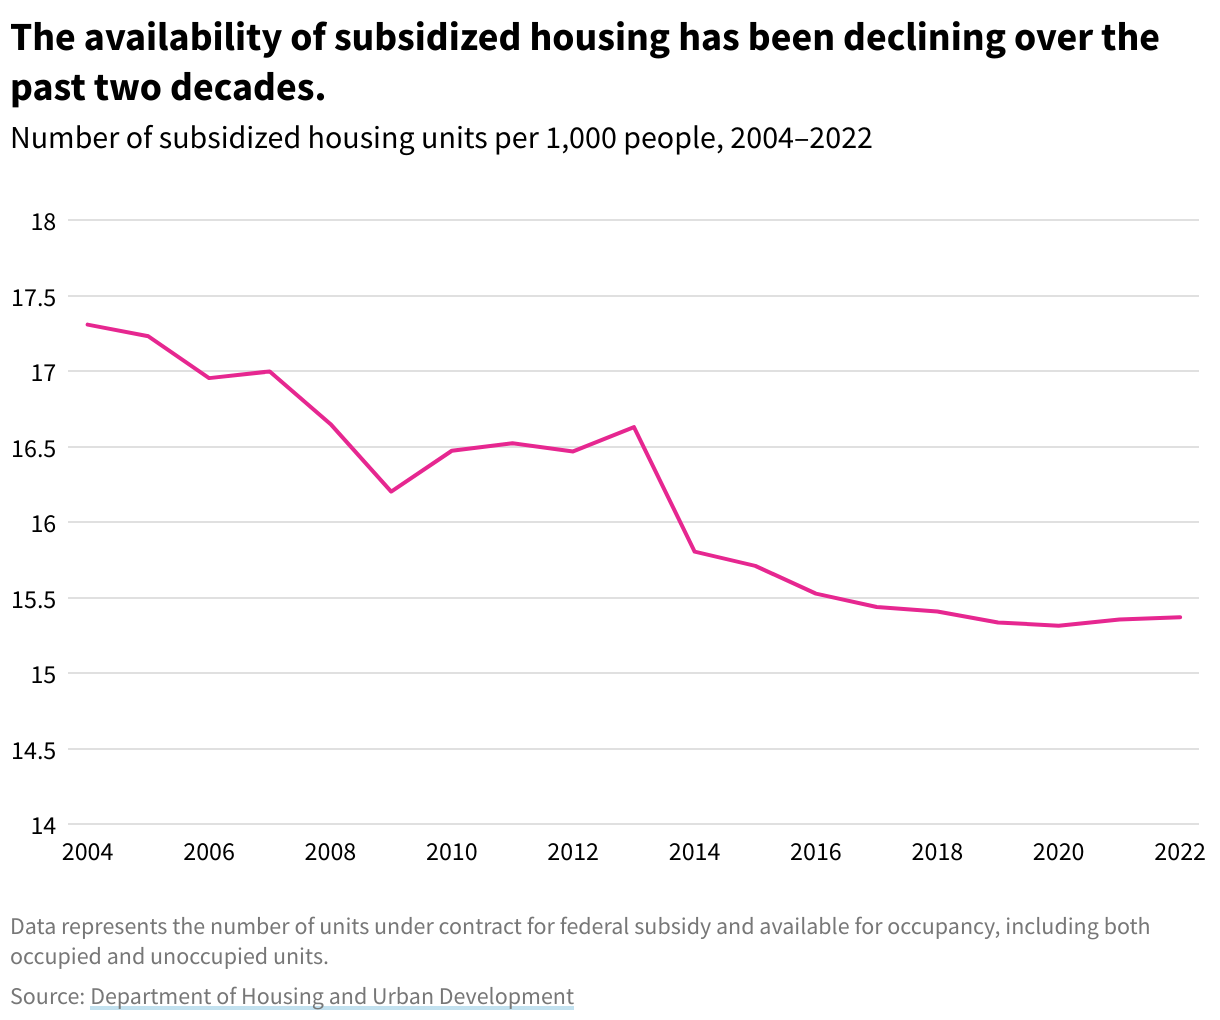 Line chart from 2004 to 2022. Subsidized housing units was highest in 2004 at 17.31 units per 1000 people; it has decreased over time to 15.4 in 2022. There was a drop from 2013 to 2014 (16.6 to 15.8), but the line has been relatively flat since then.